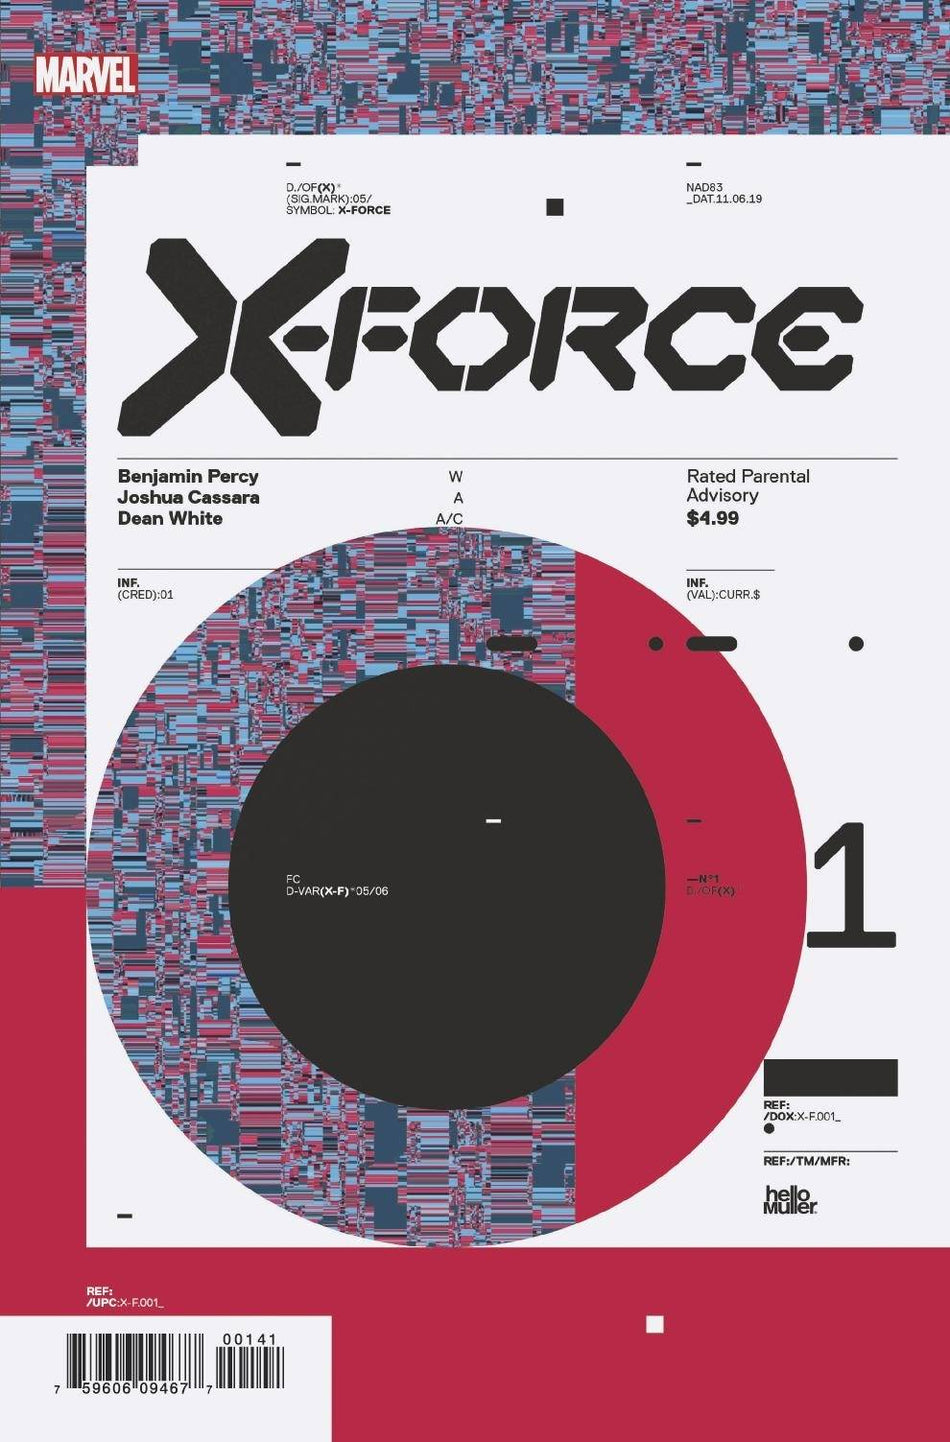 Photo of X-Force Issue 1 Muller Design Var Dx comic sold by Stronghold Collectibles